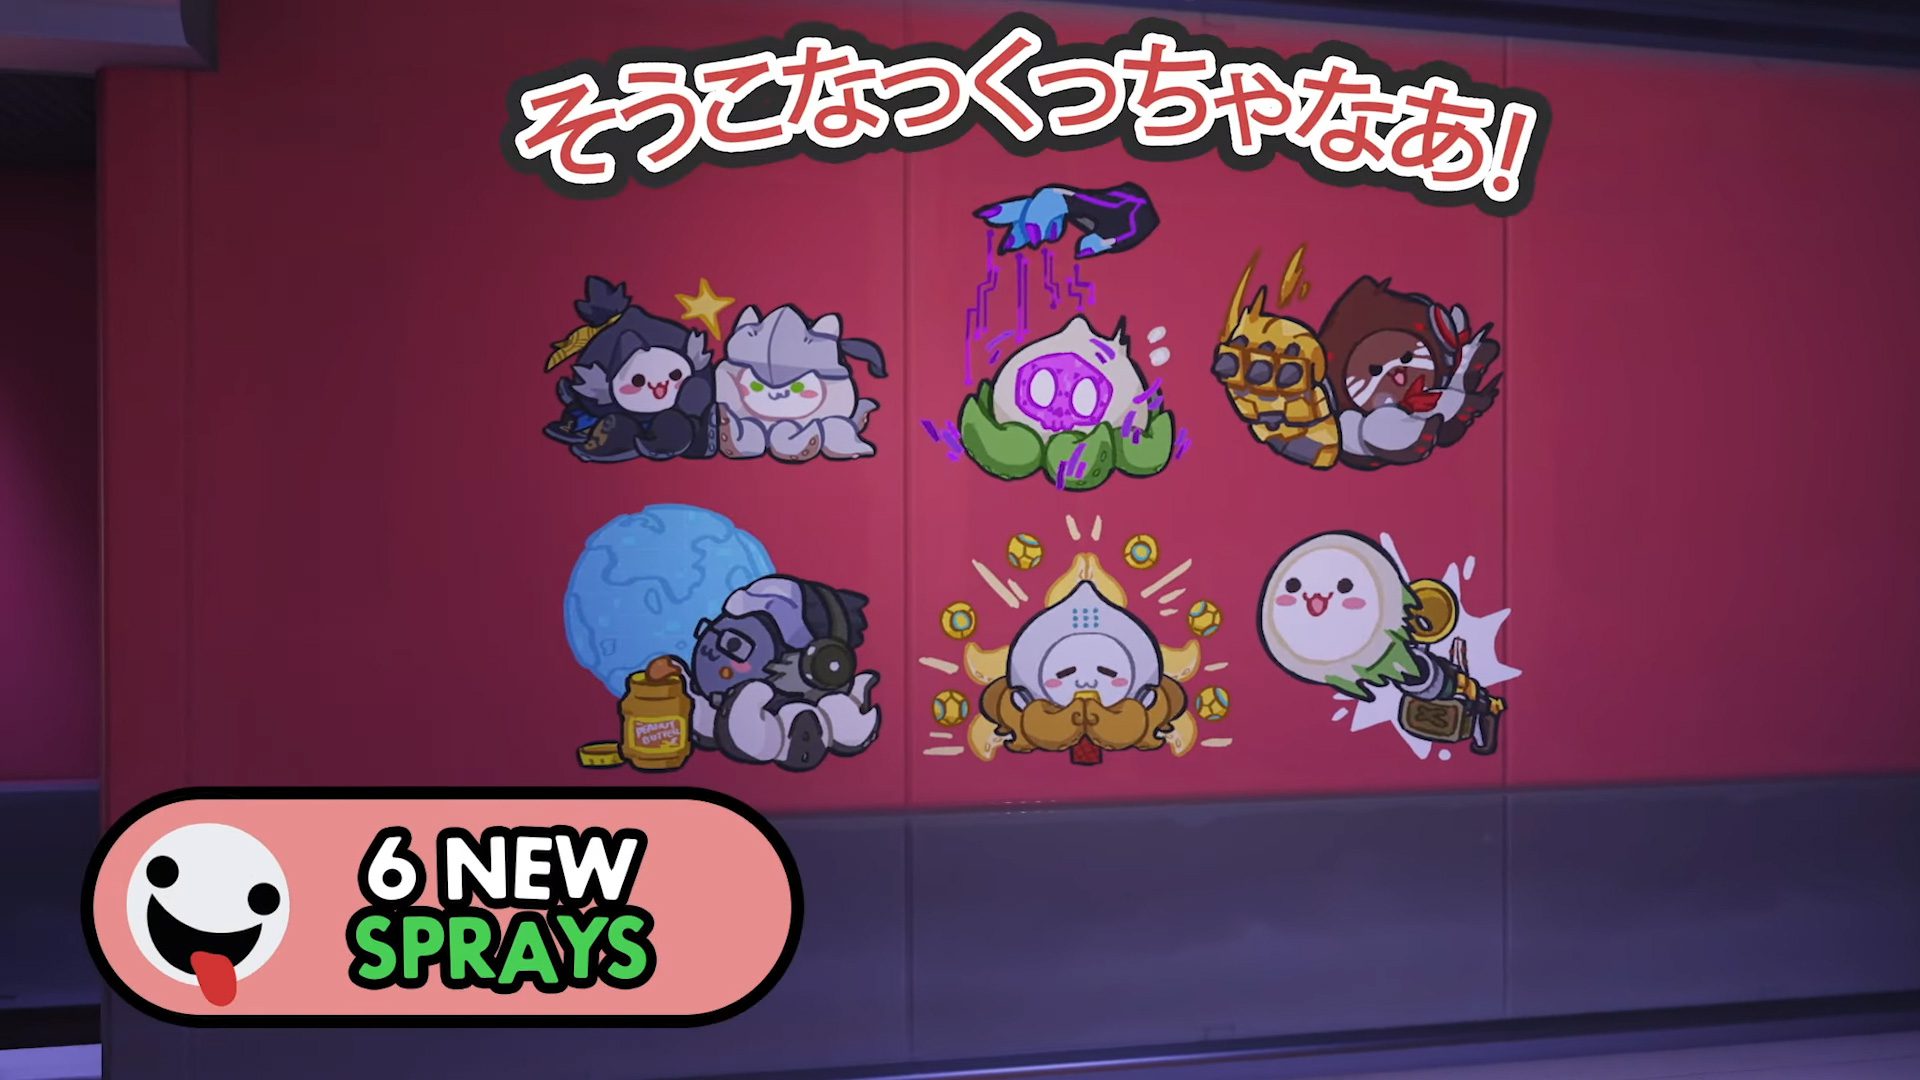 Overwatch is giving out six Pachimari sprays for players who log in before March 22, 2021.